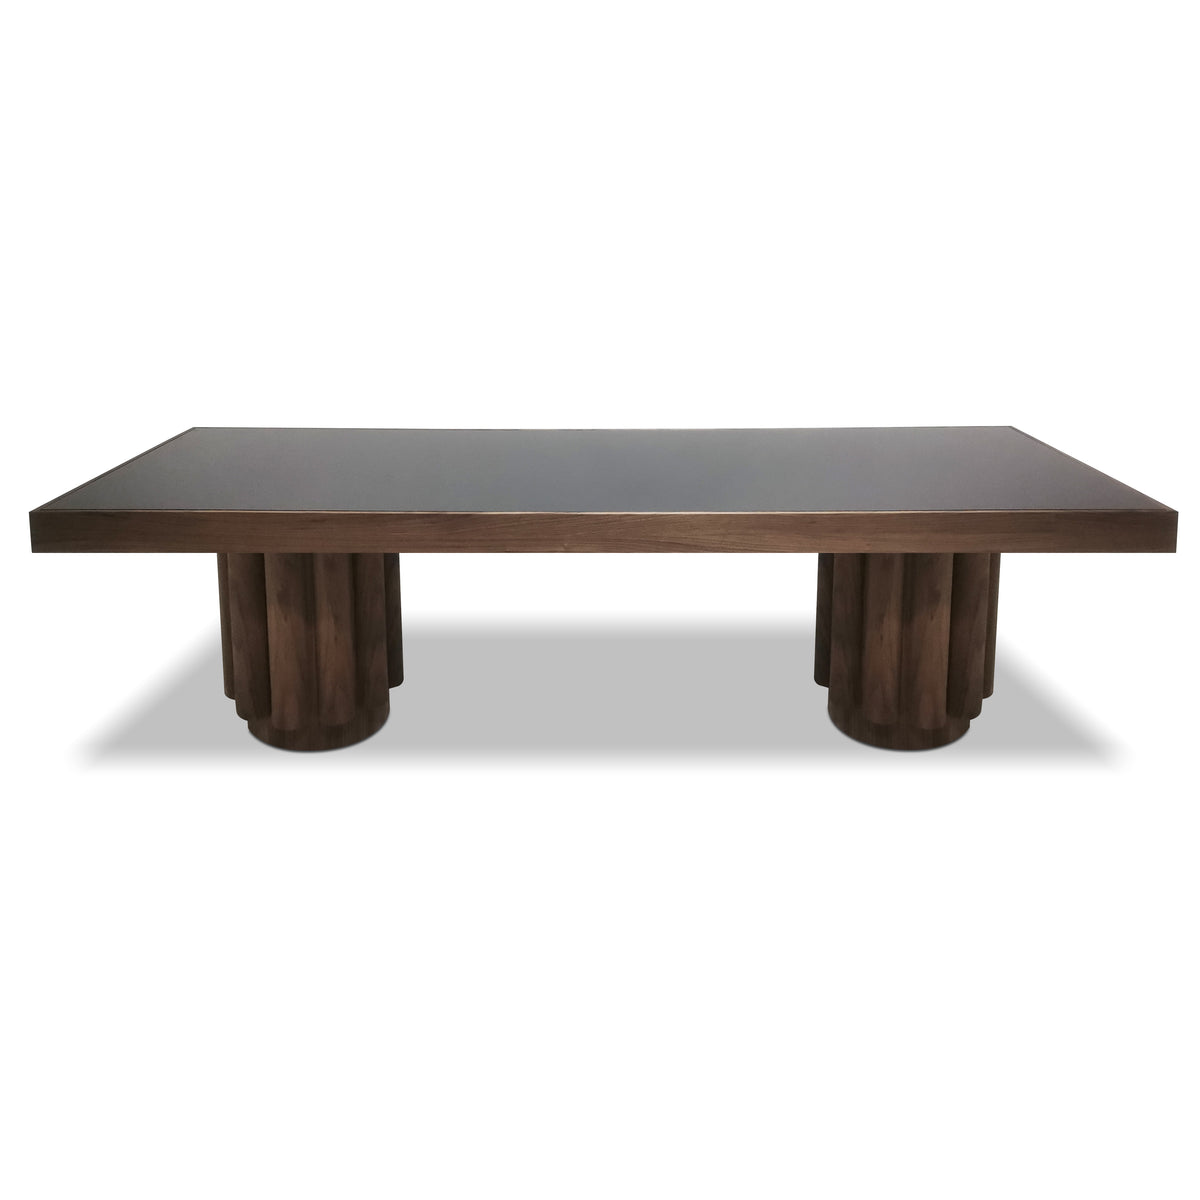 Eden Rock Double Pedestal Dining Table with Glass Top